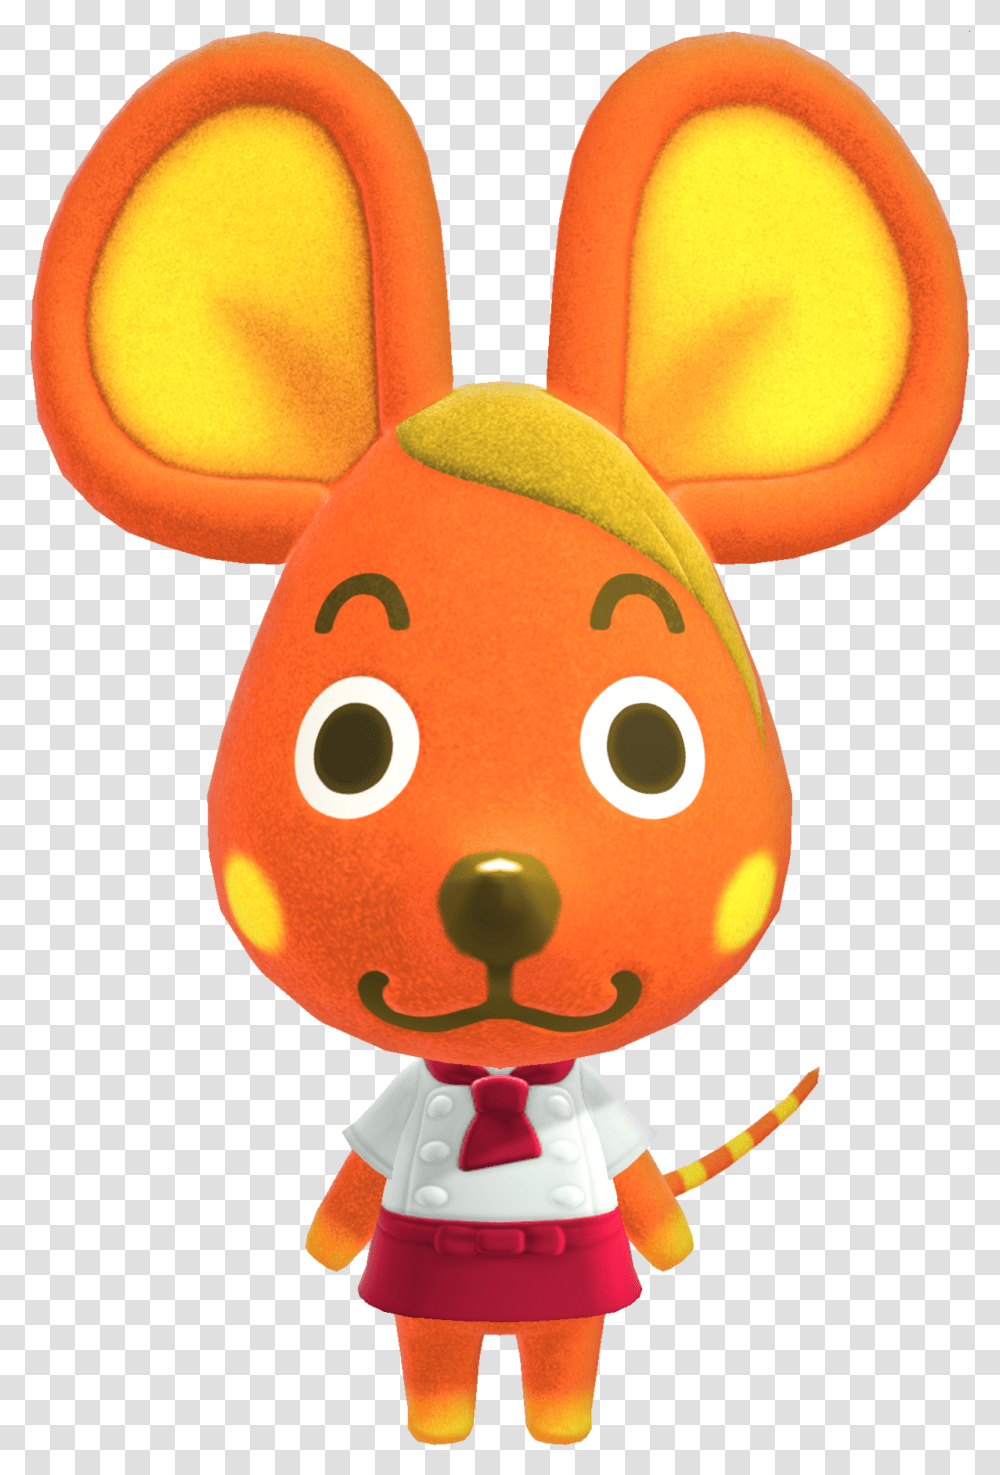 Bettina Animal Crossing Wiki Nookipedia Bettina From Animal Crossing, Toy, Food, Egg, Sweets Transparent Png